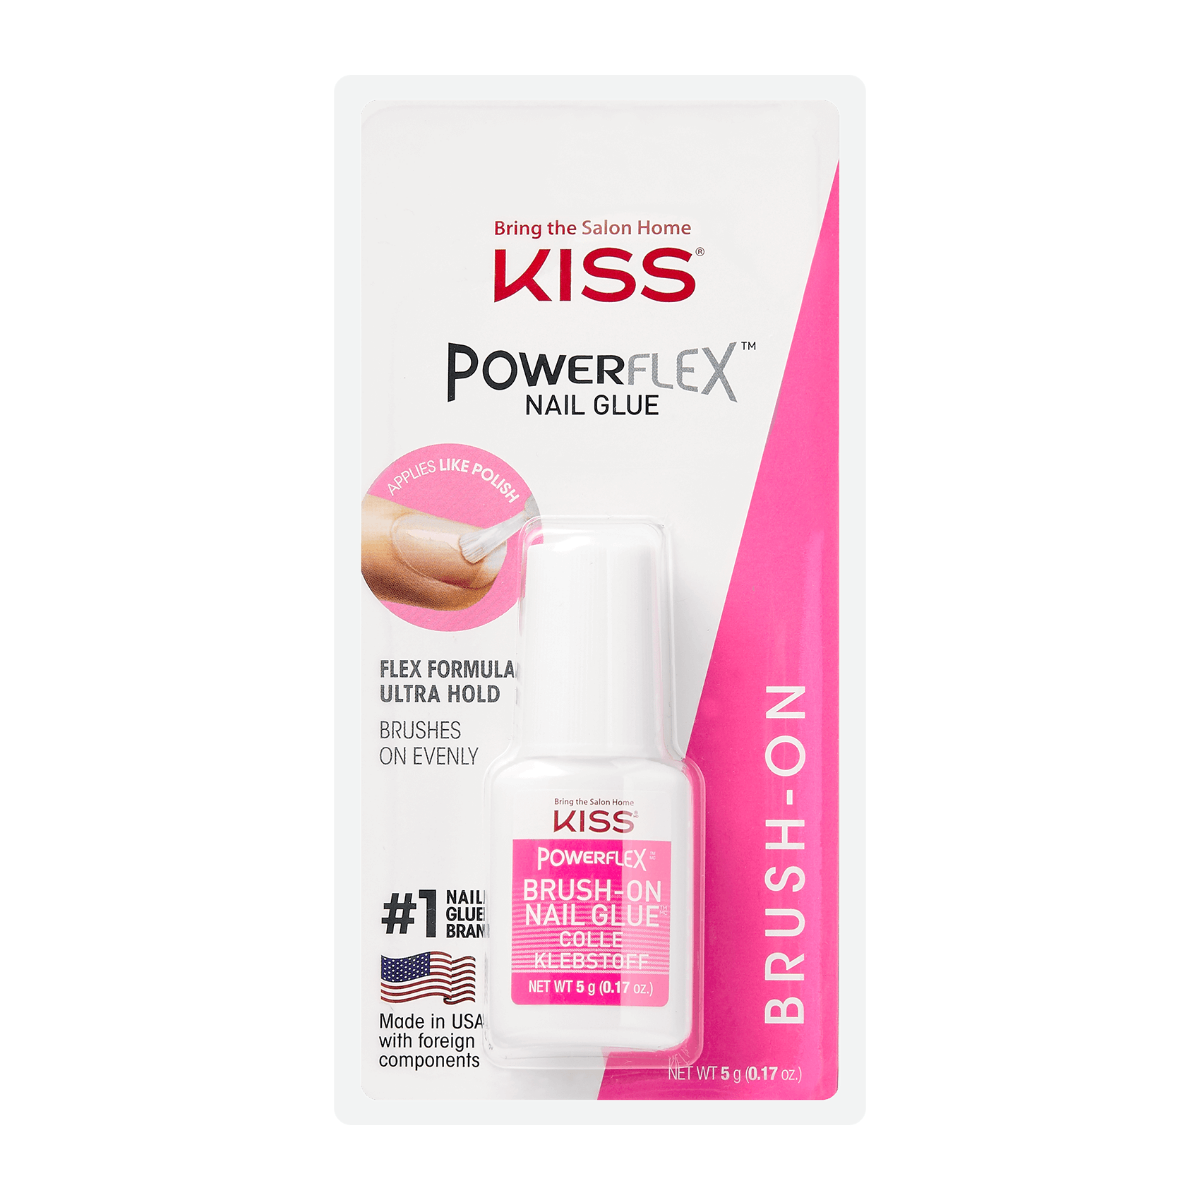 How To Open Kiss Nail Glue